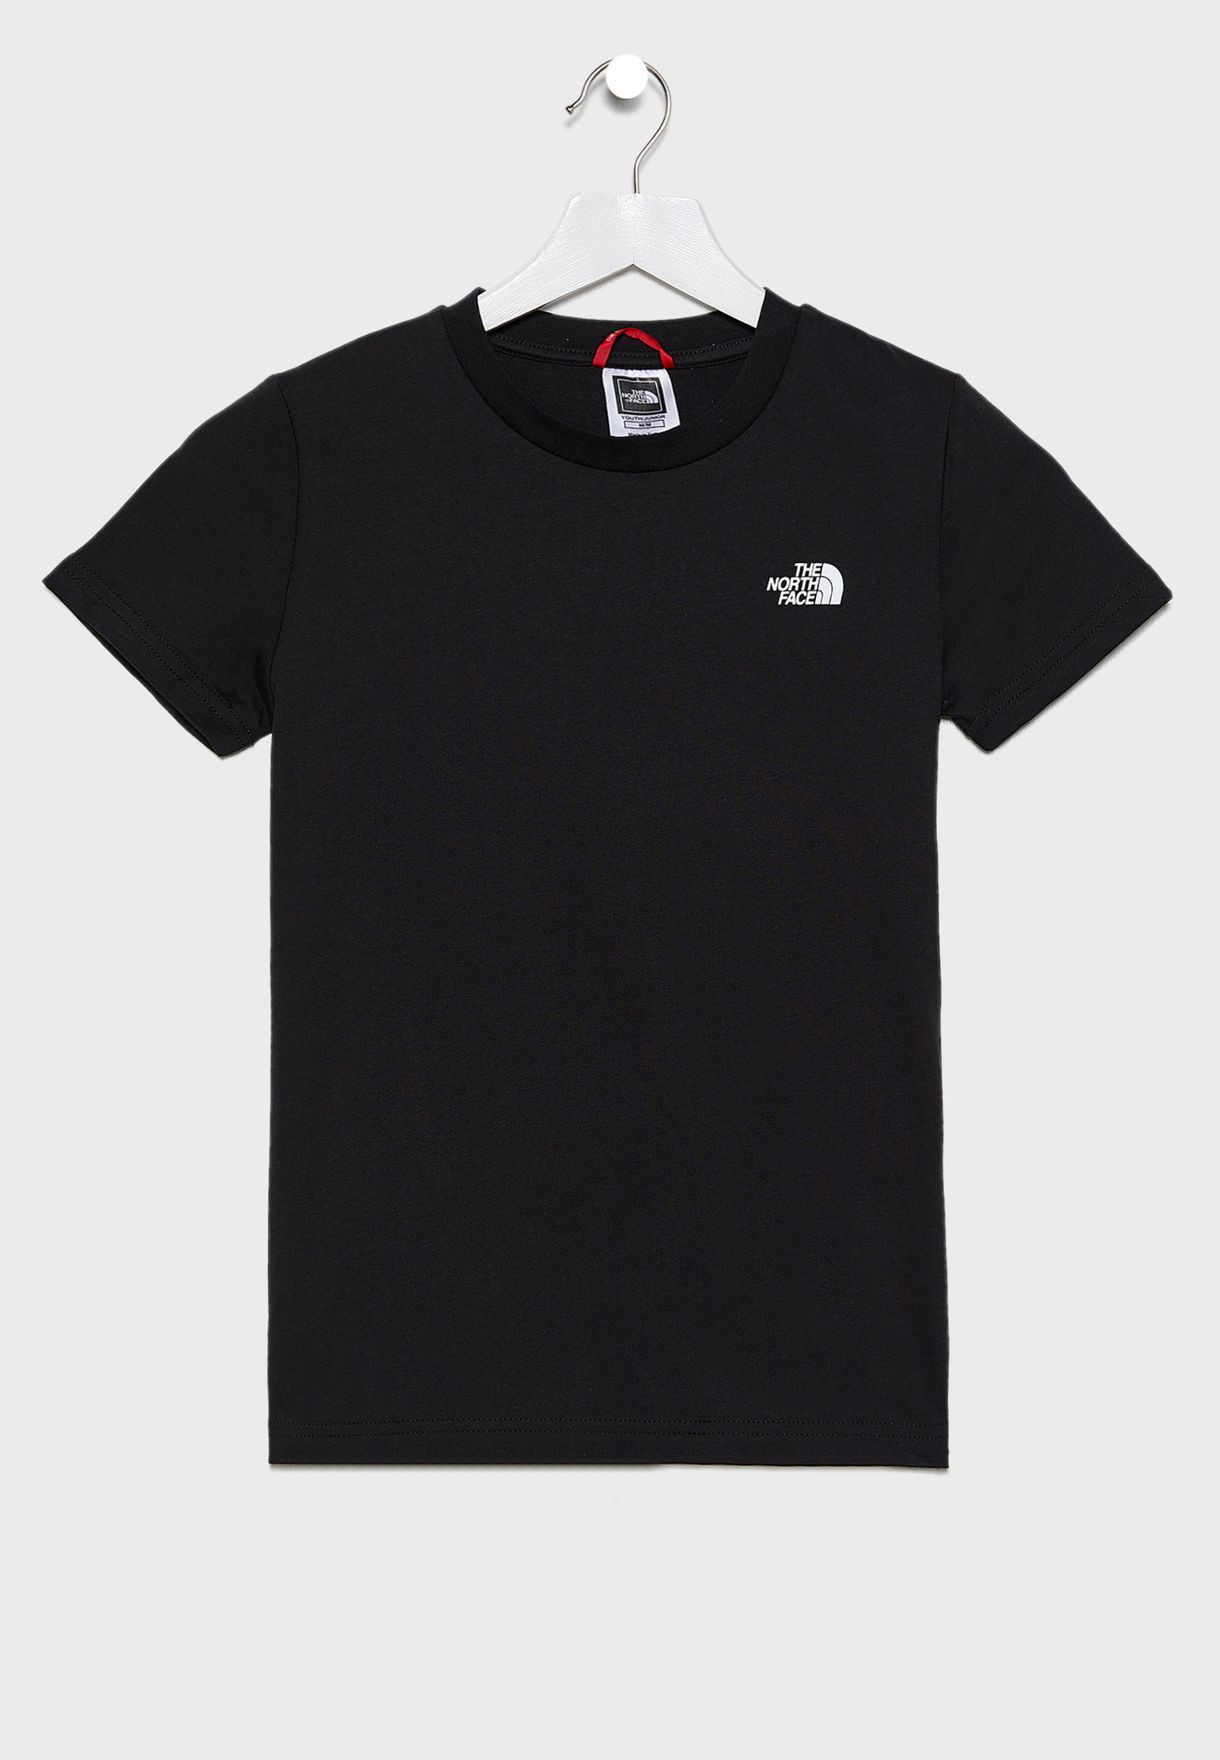 youth north face t shirt